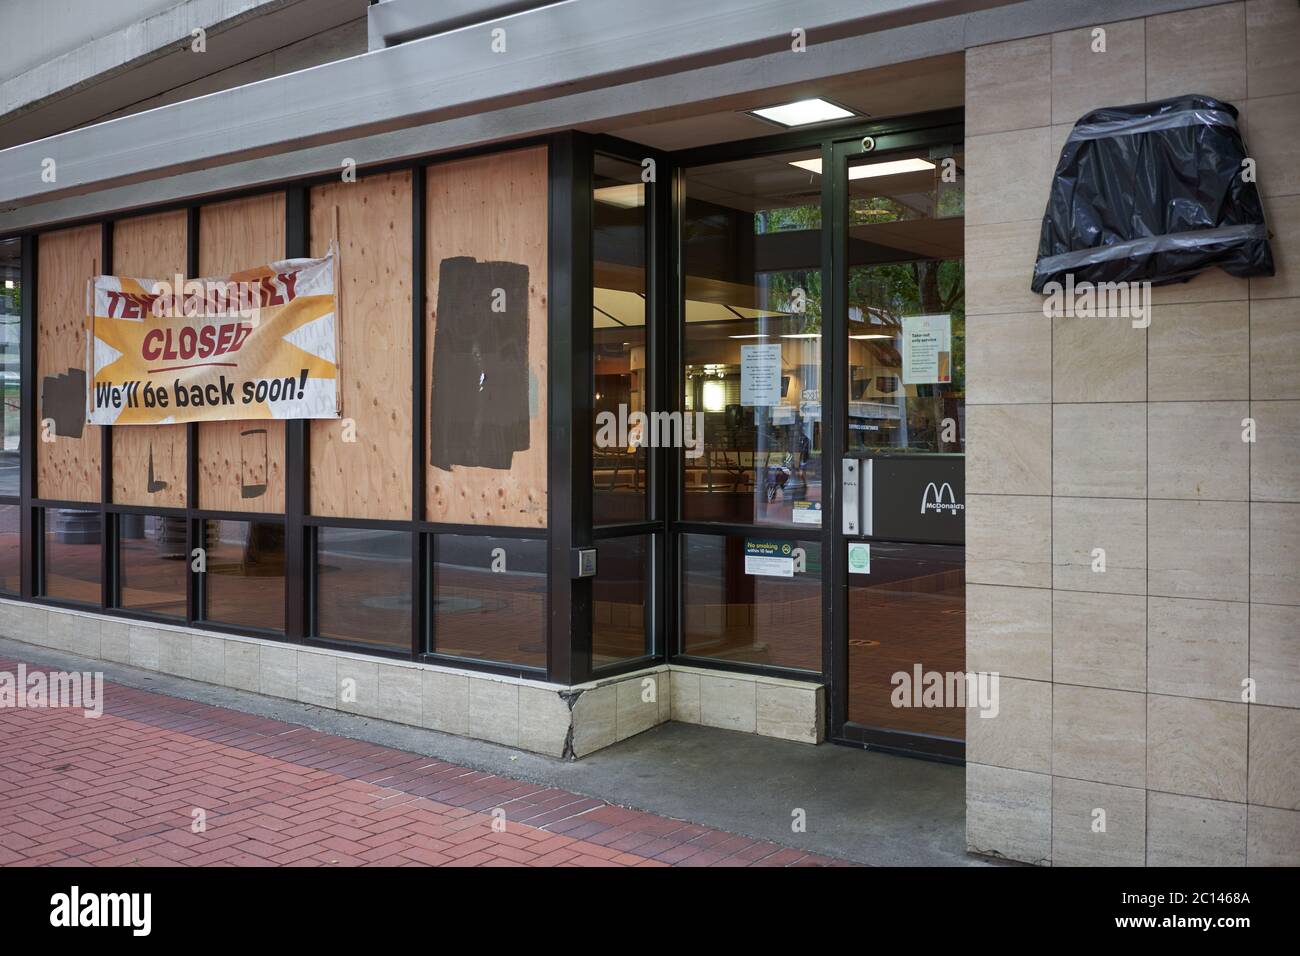 A temporarily closed and boarded up McDonald's restaurant in downtown Portland, Oregon, during the ongoing protest, seen on Saturday, Jun 13, 2020. Stock Photo